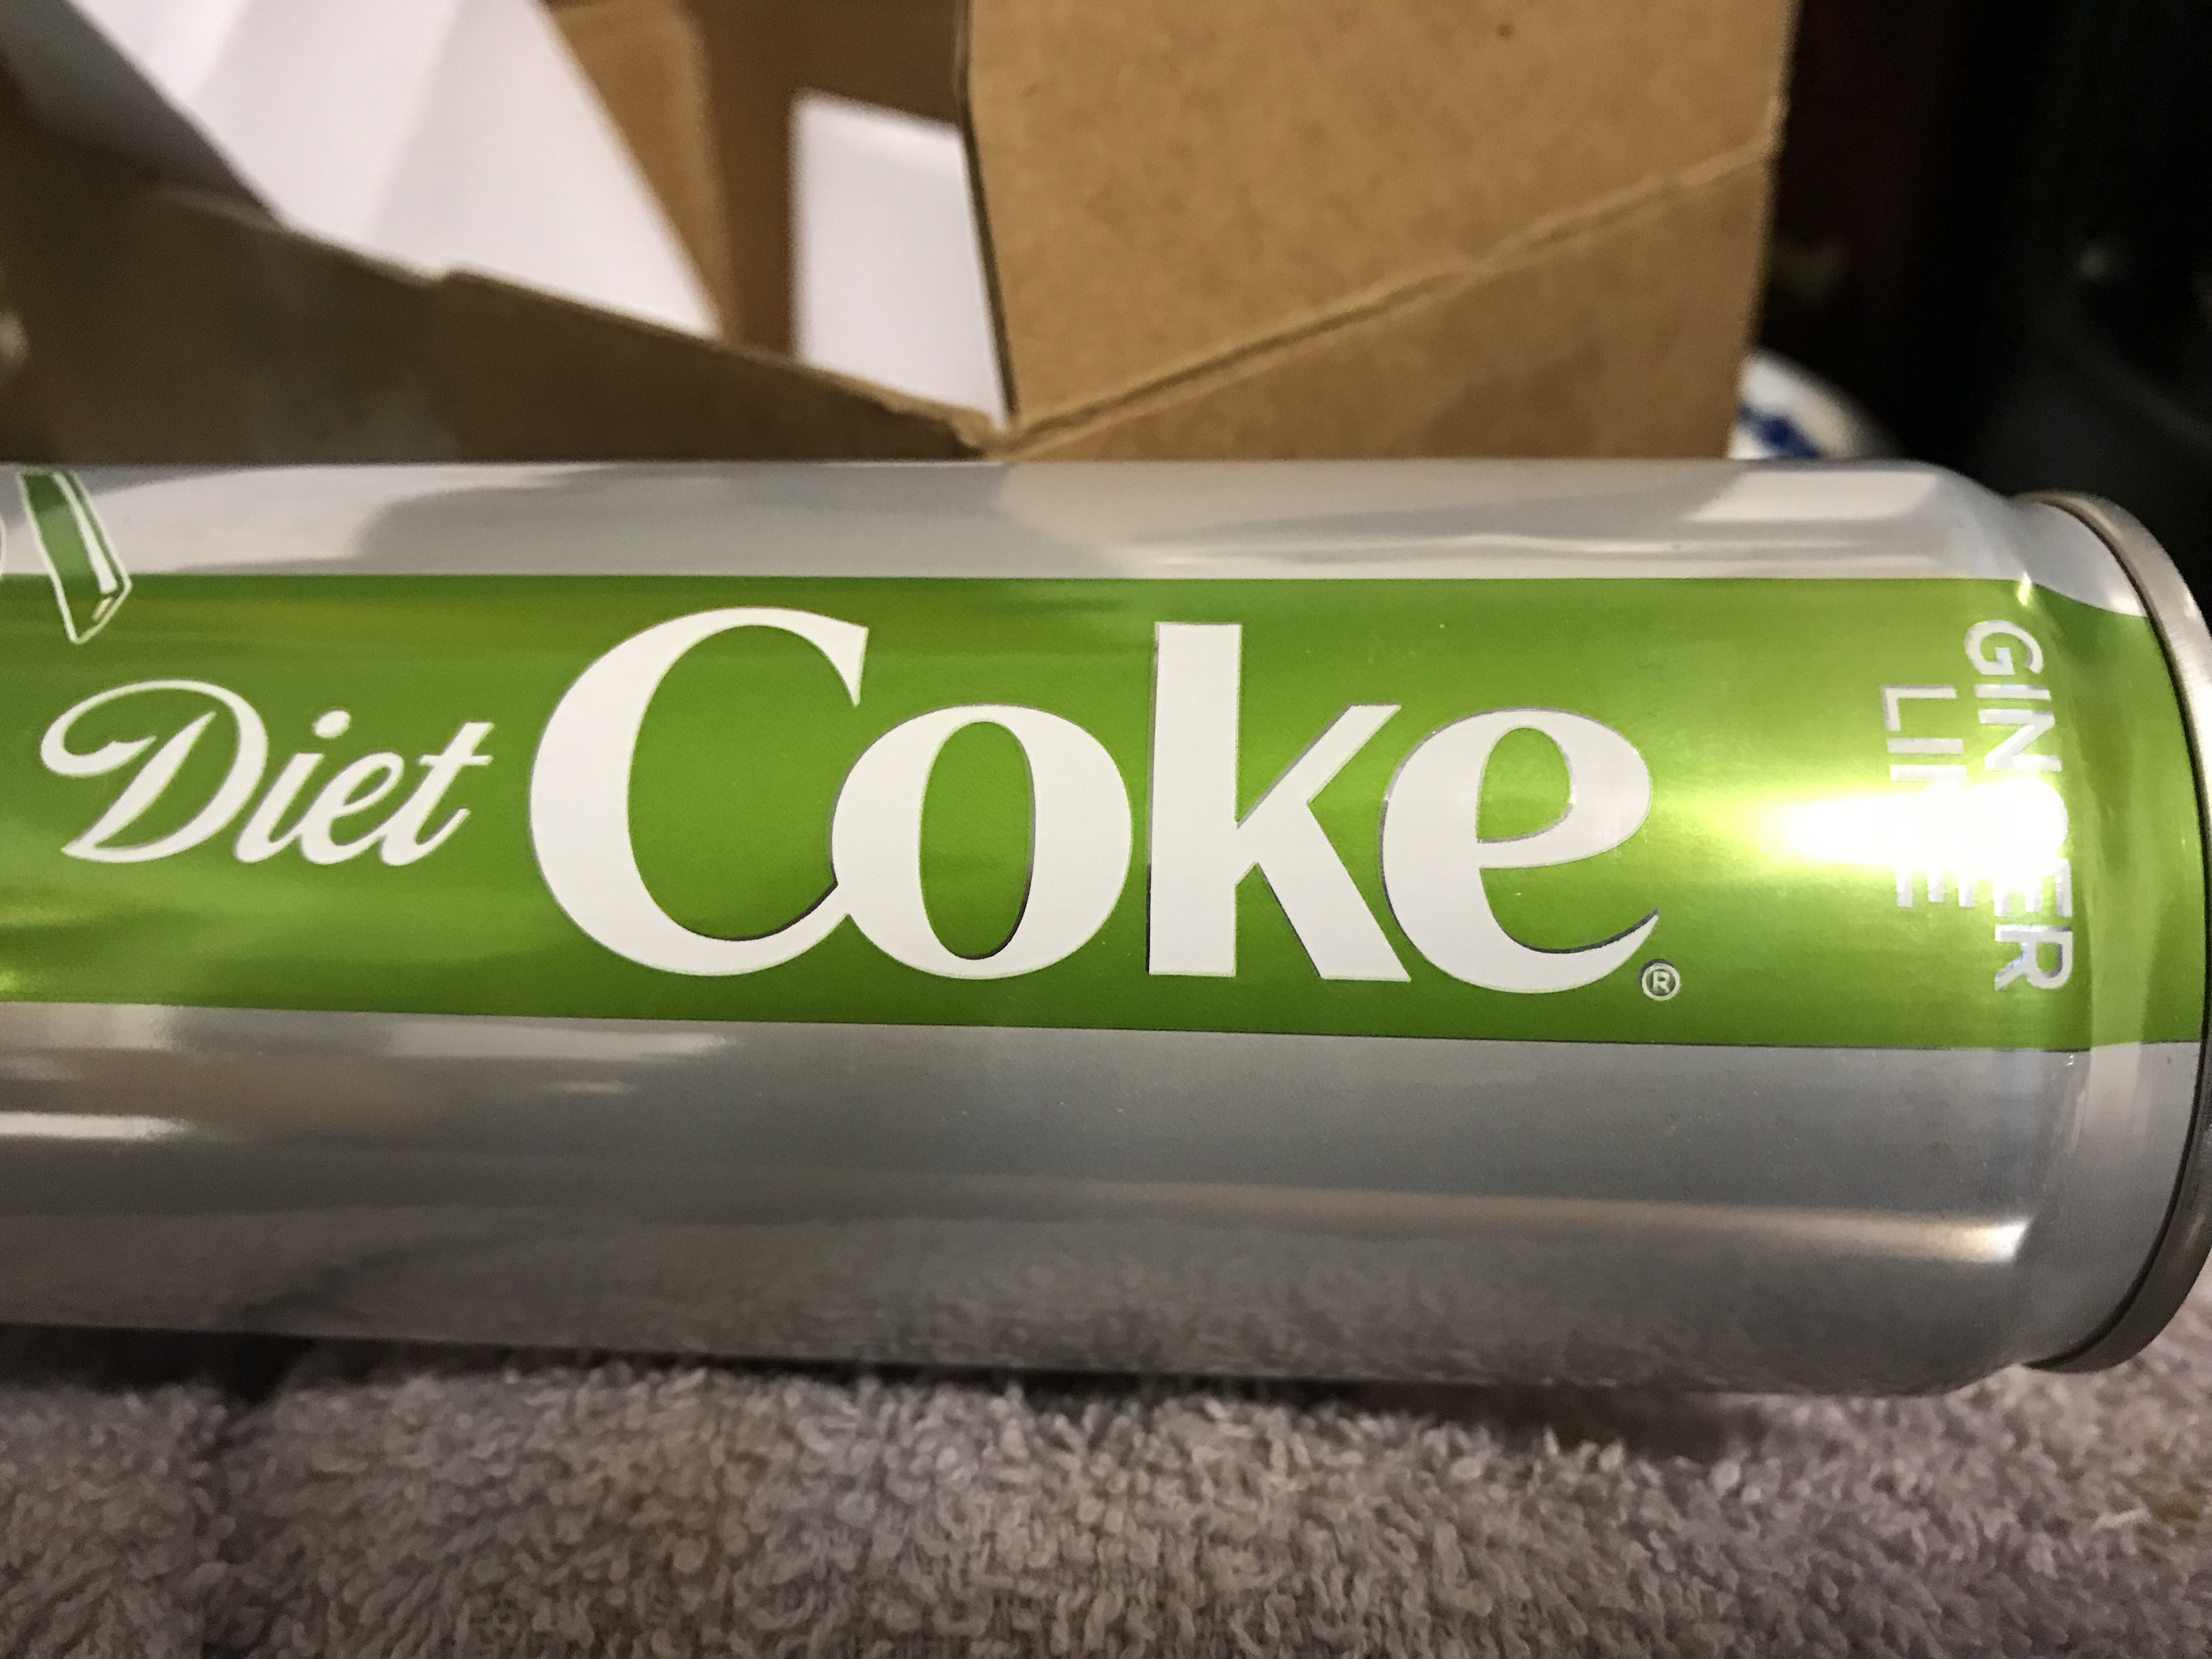 Diet Coke ginger lime can.  No calories OR taste.  Photo taken by and the property of FourWalls.